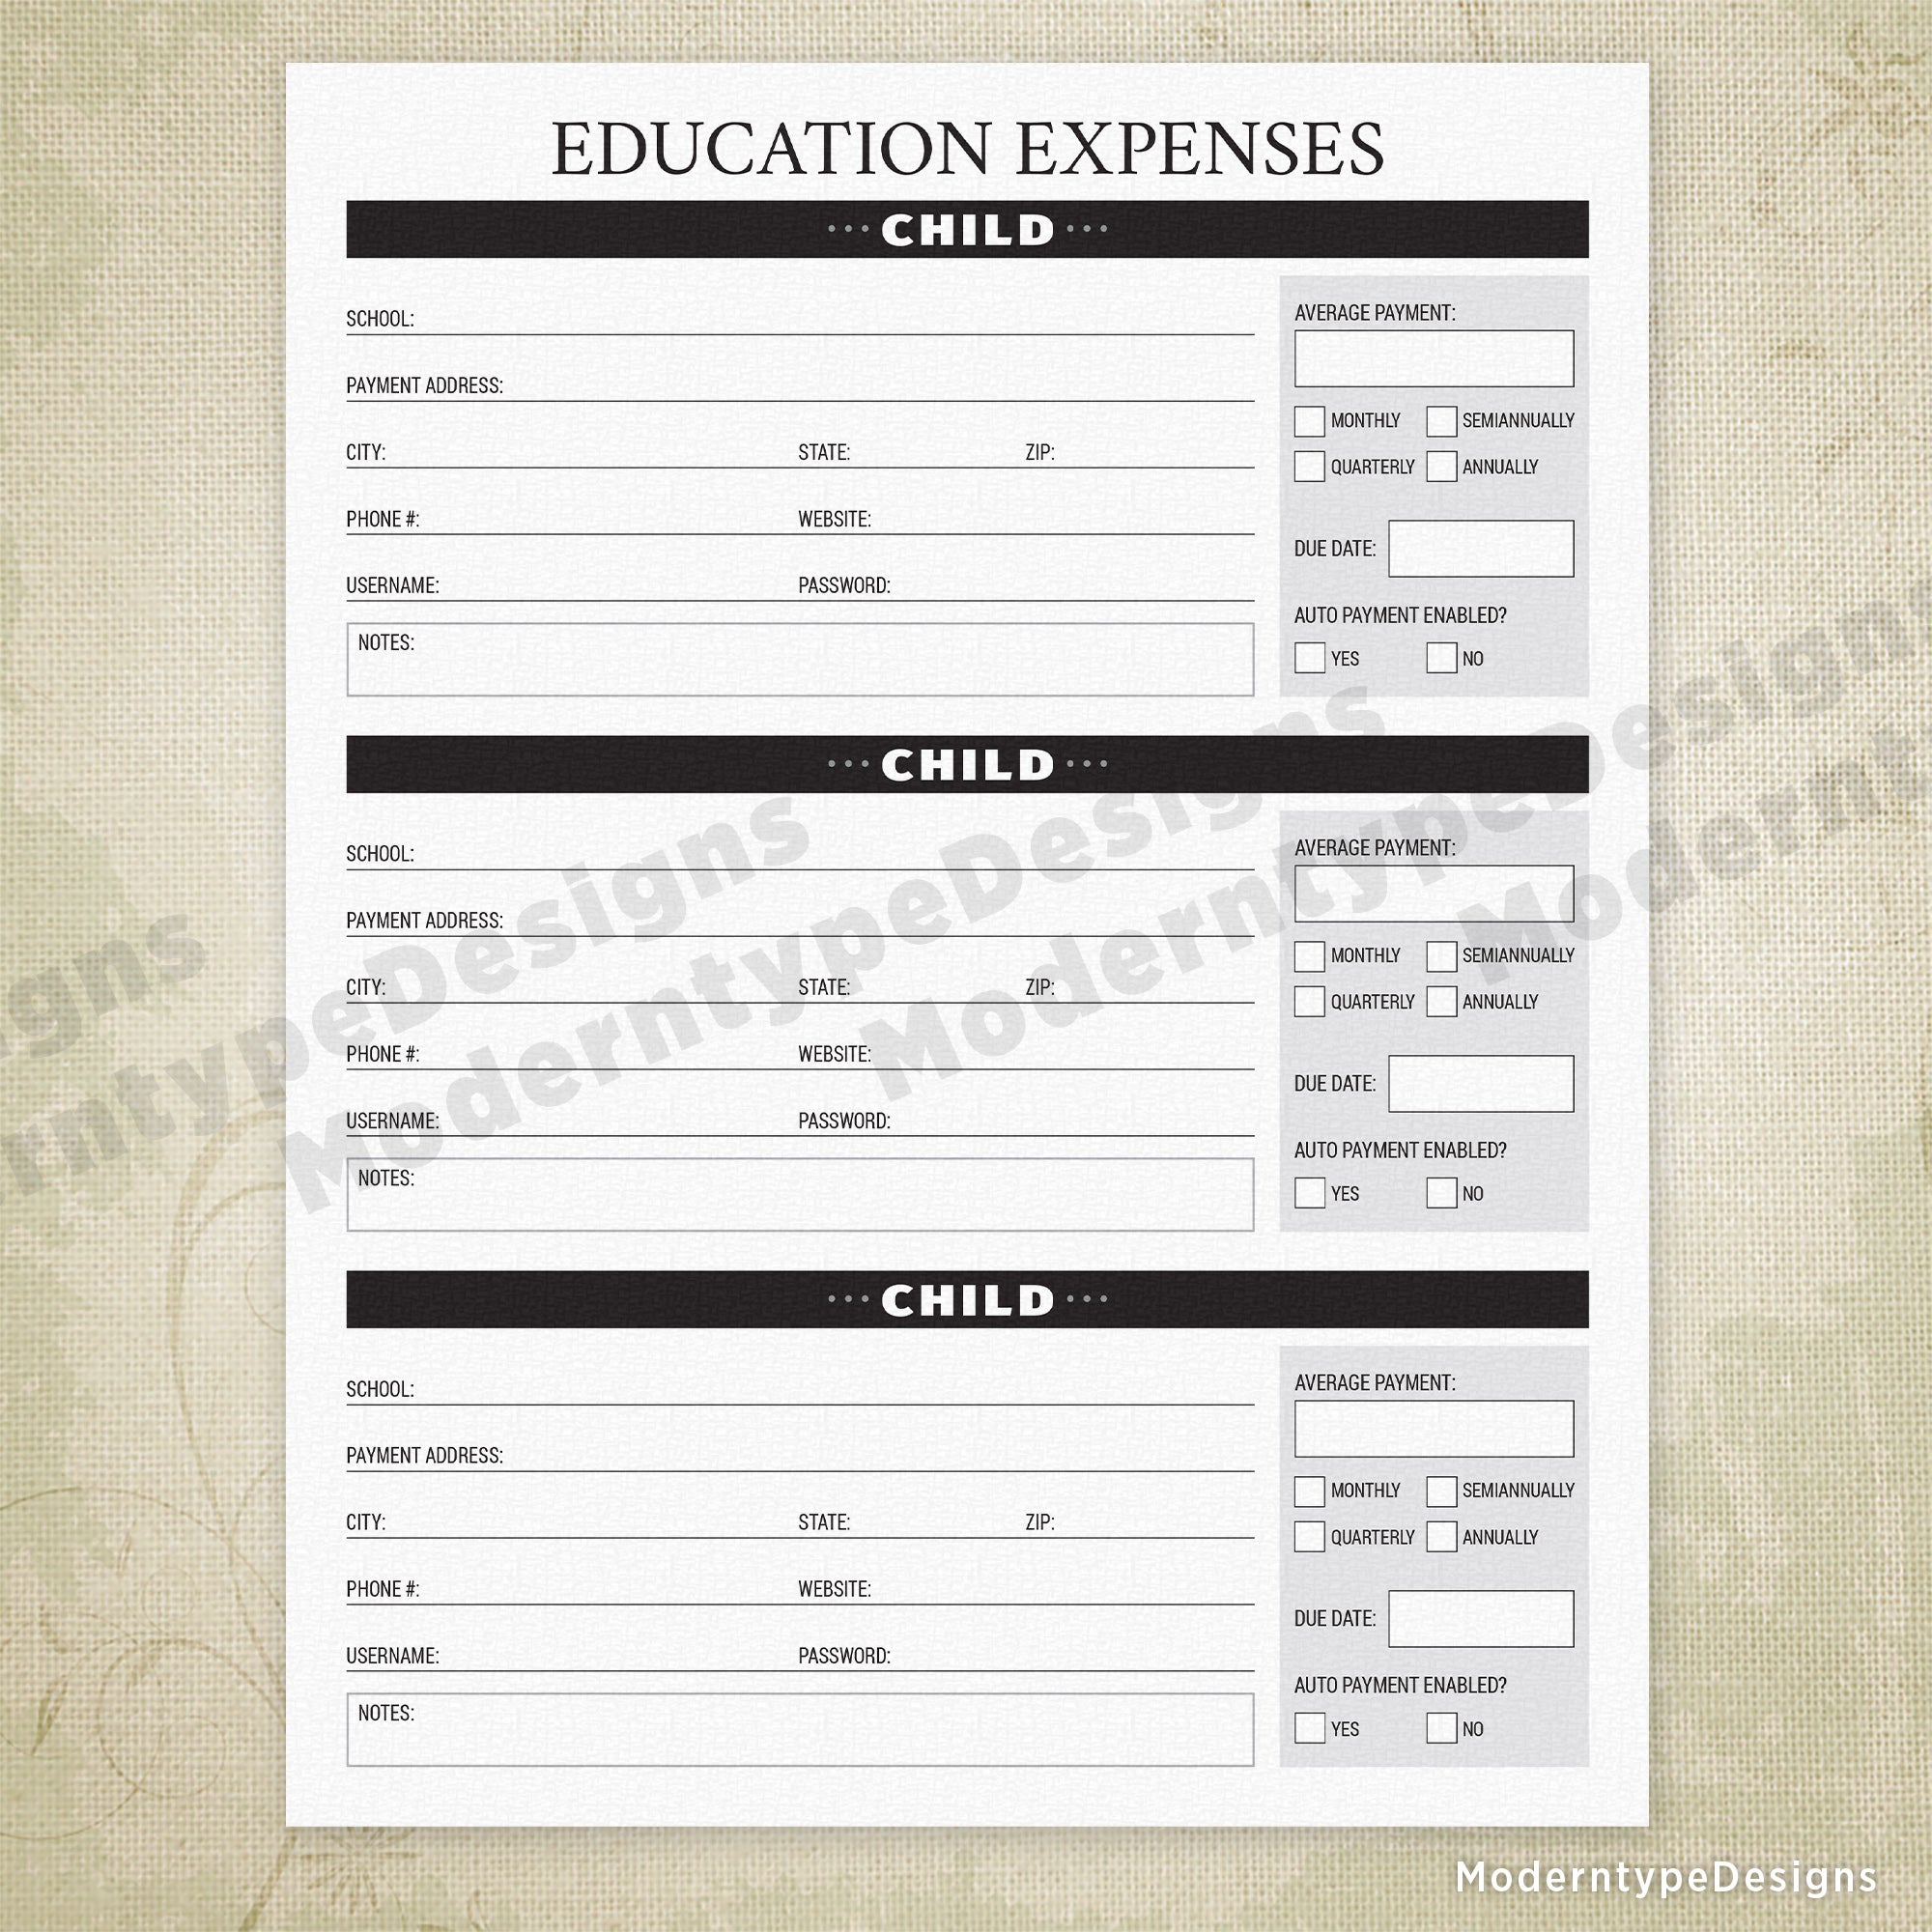 Education Expenses Printable - End of Life